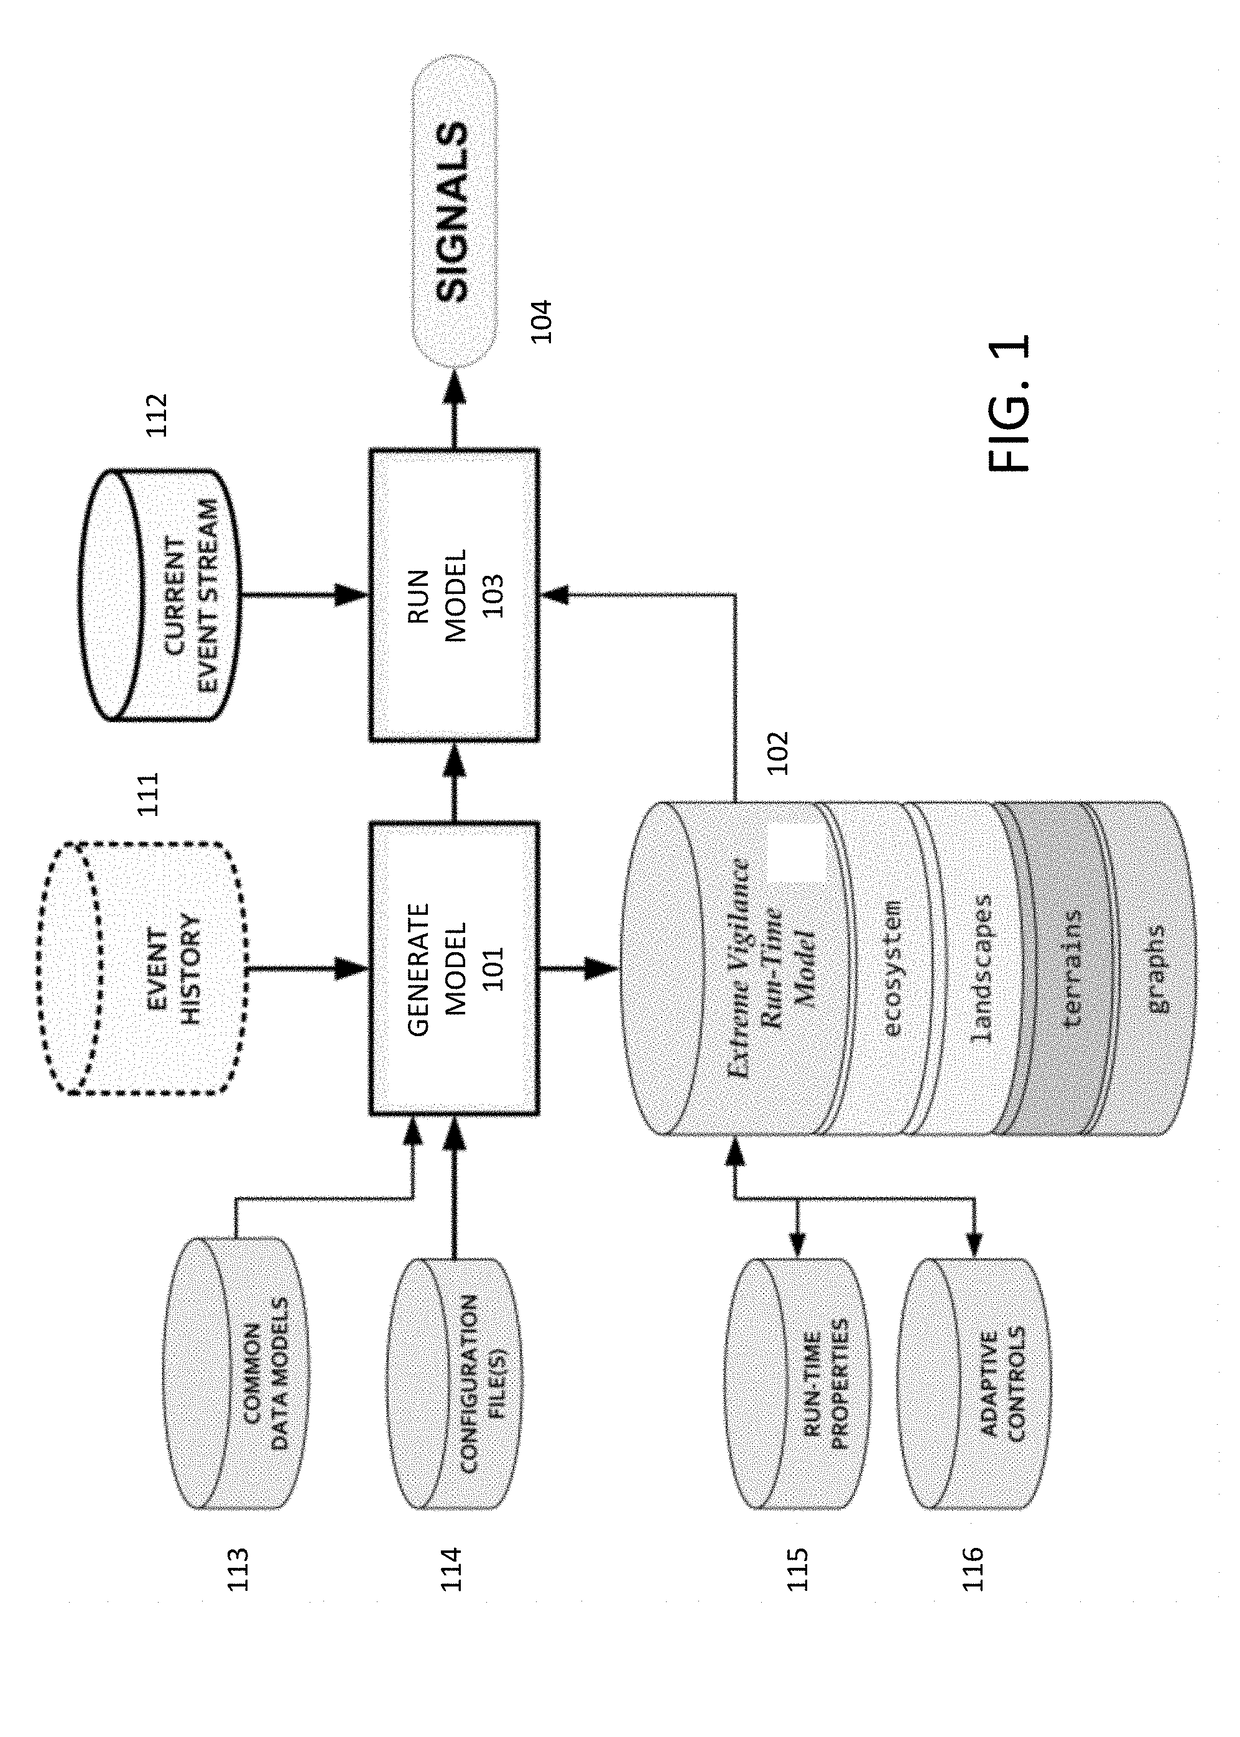 Cognitive modeling apparatus for assessing values qualitatively across a multiple dimension terrain